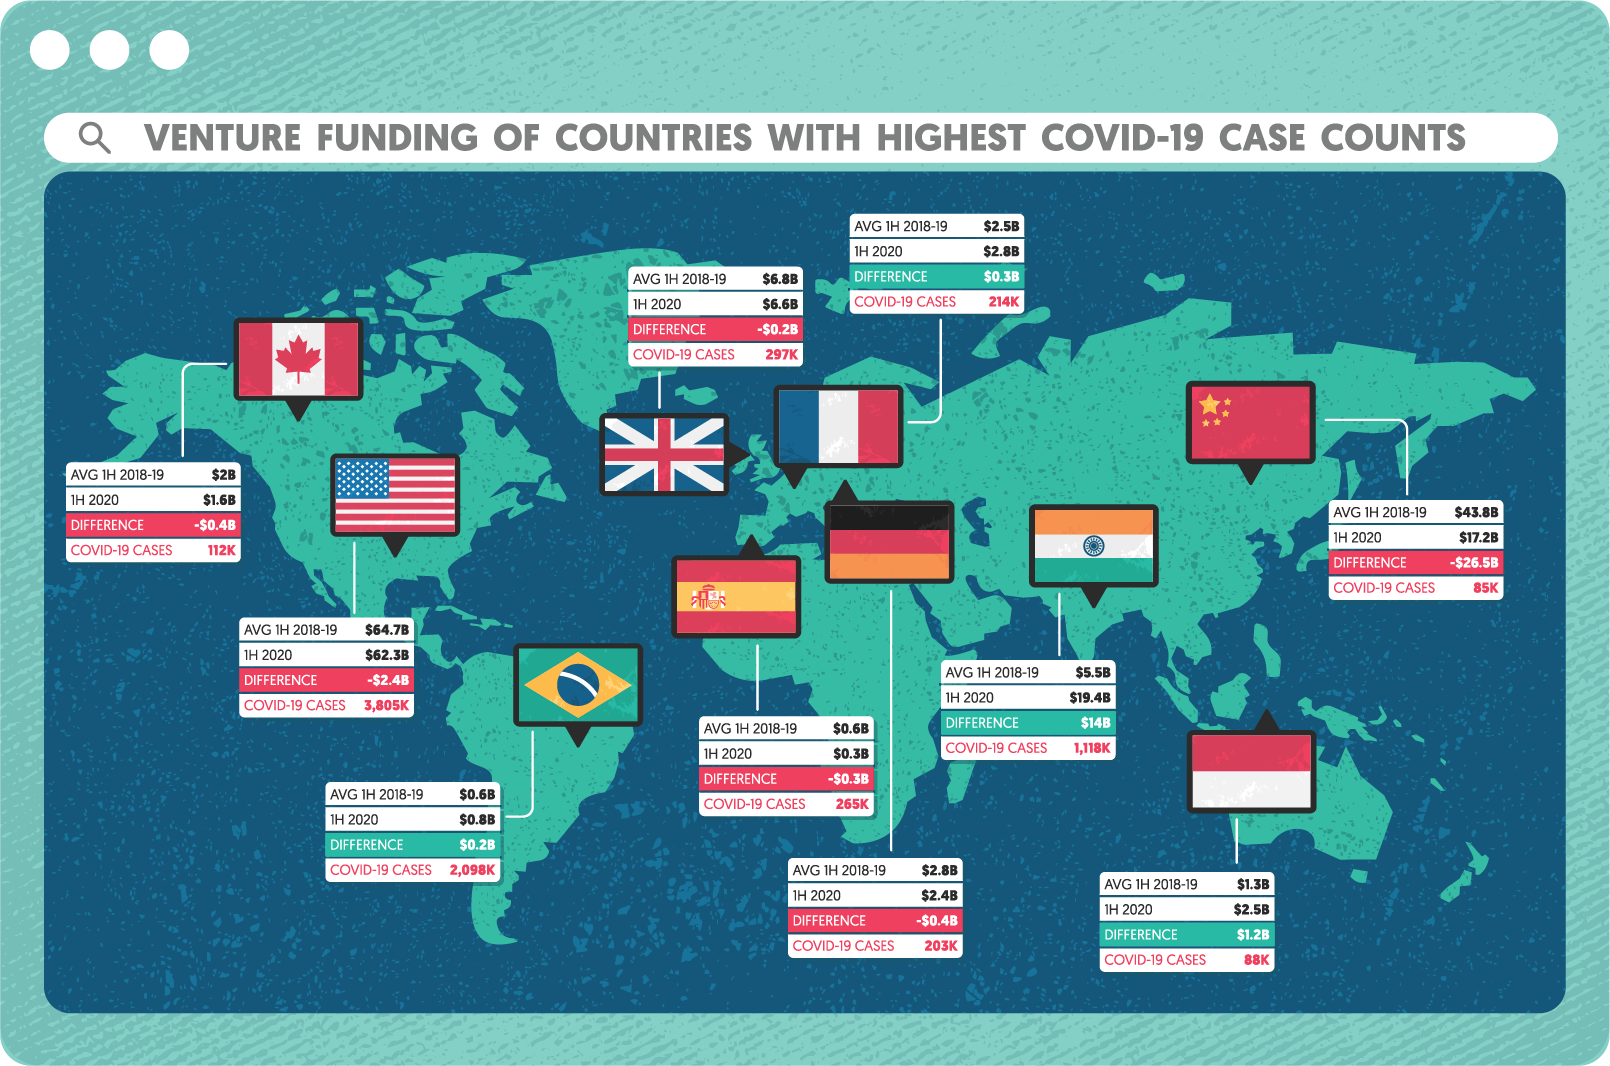 global venture funding and COVID case count map 